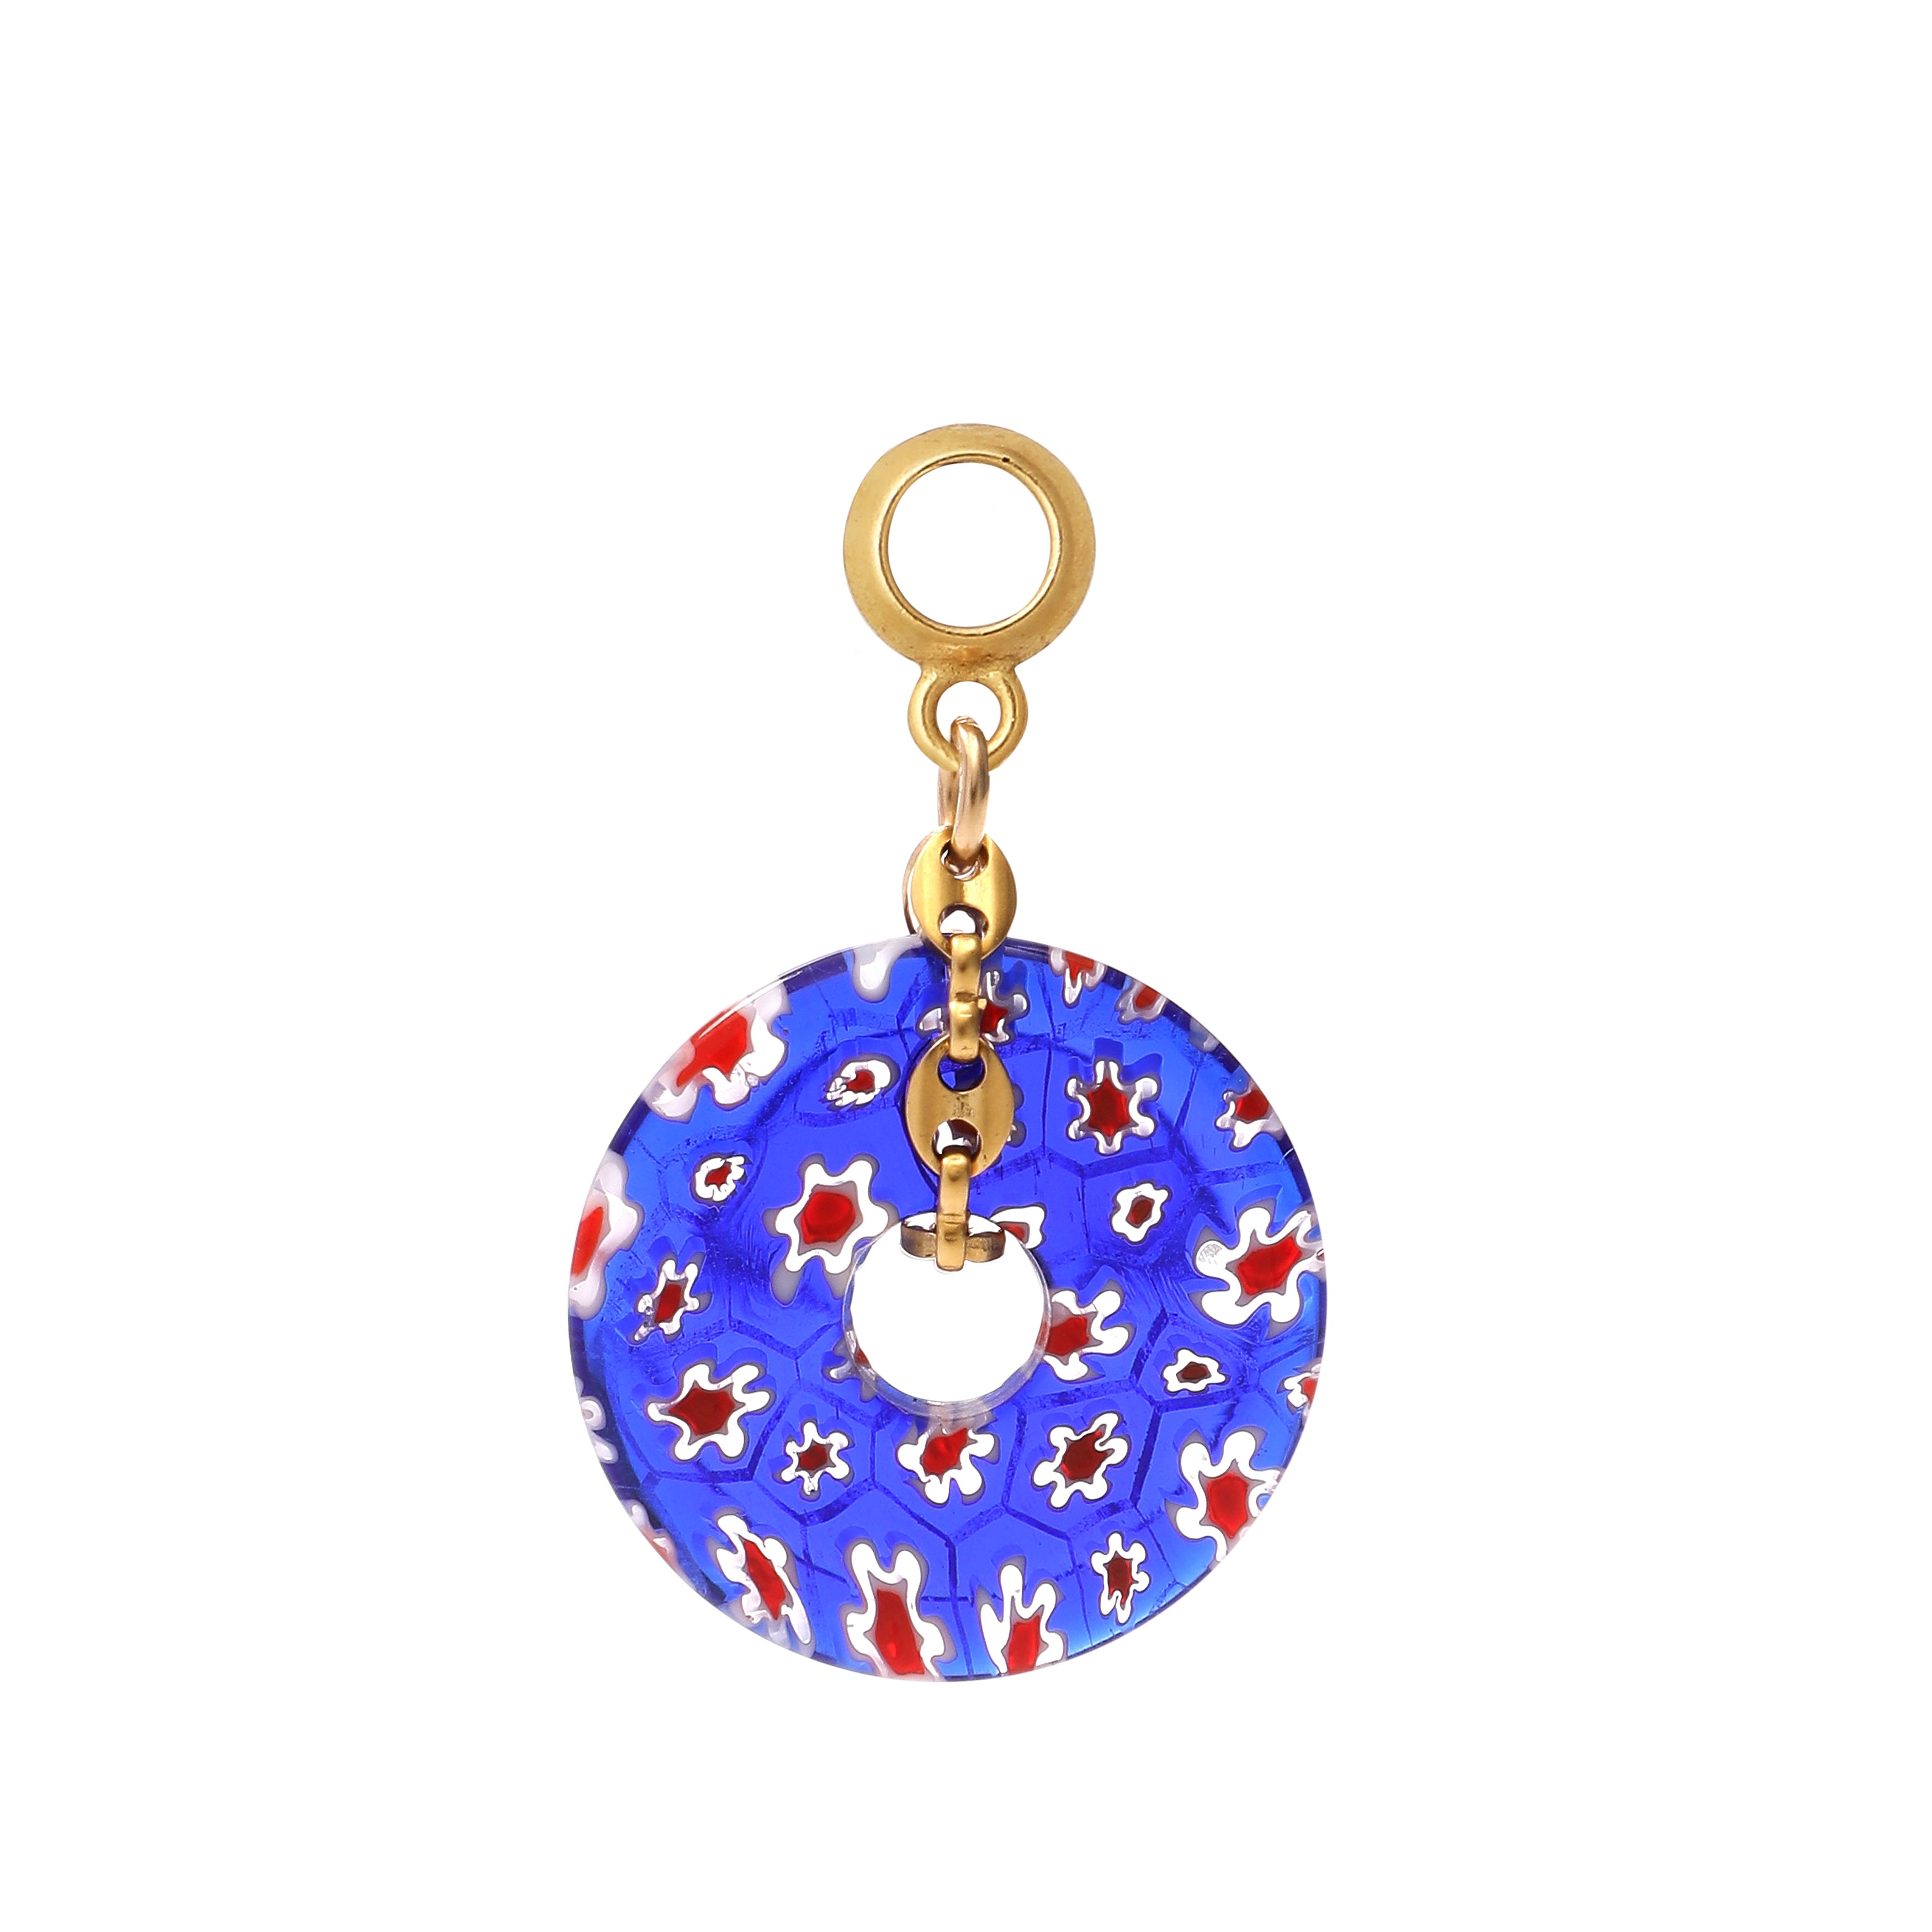 Chained Donut Earring Charm